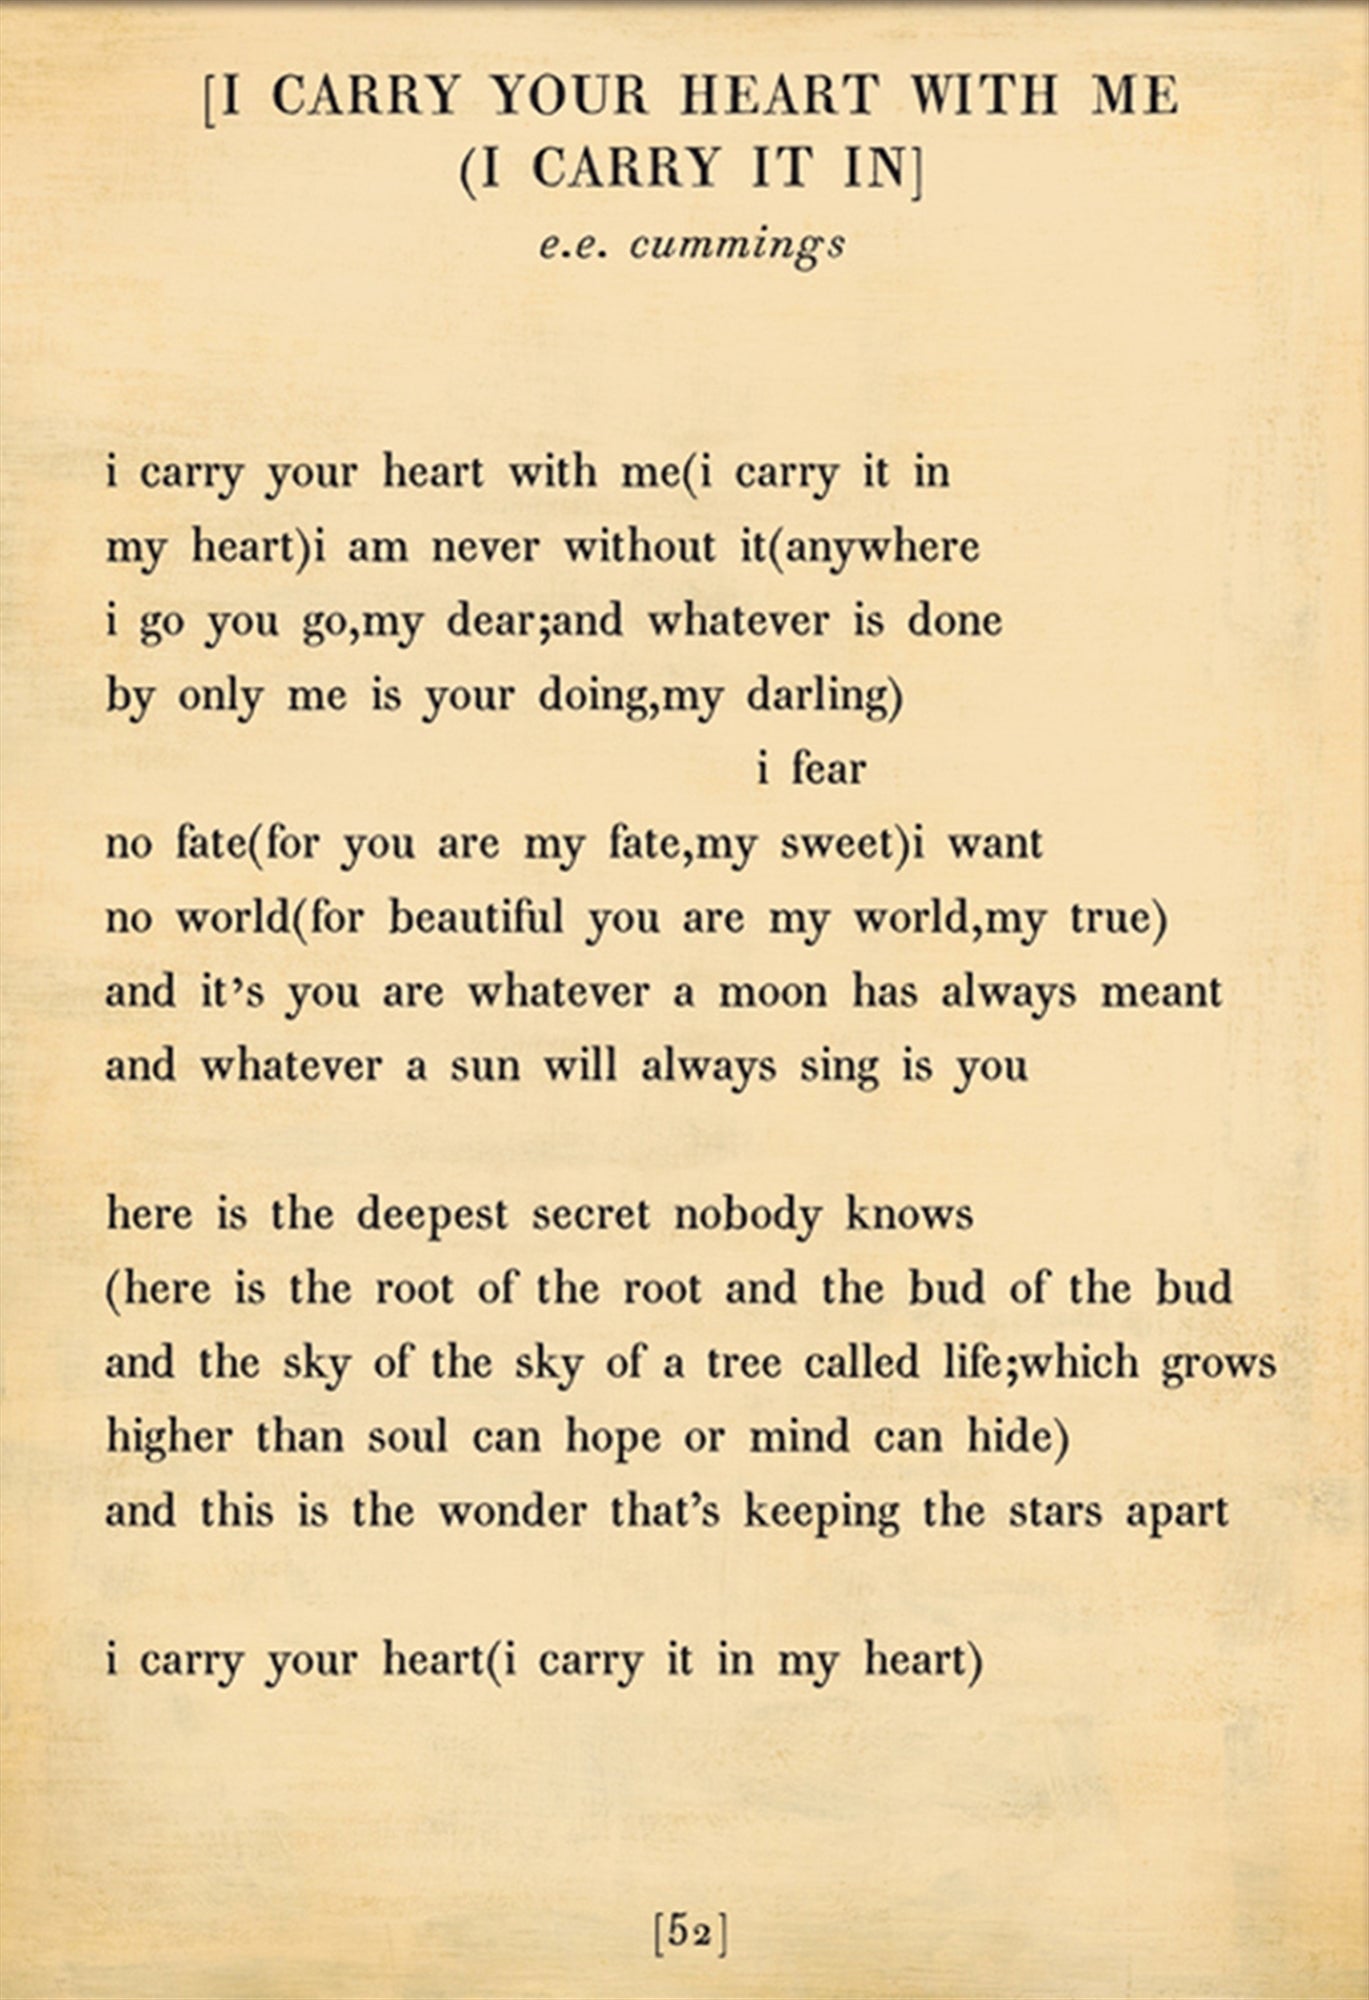 I carry your heart e.e. cummings poetry love poem -  Portugal